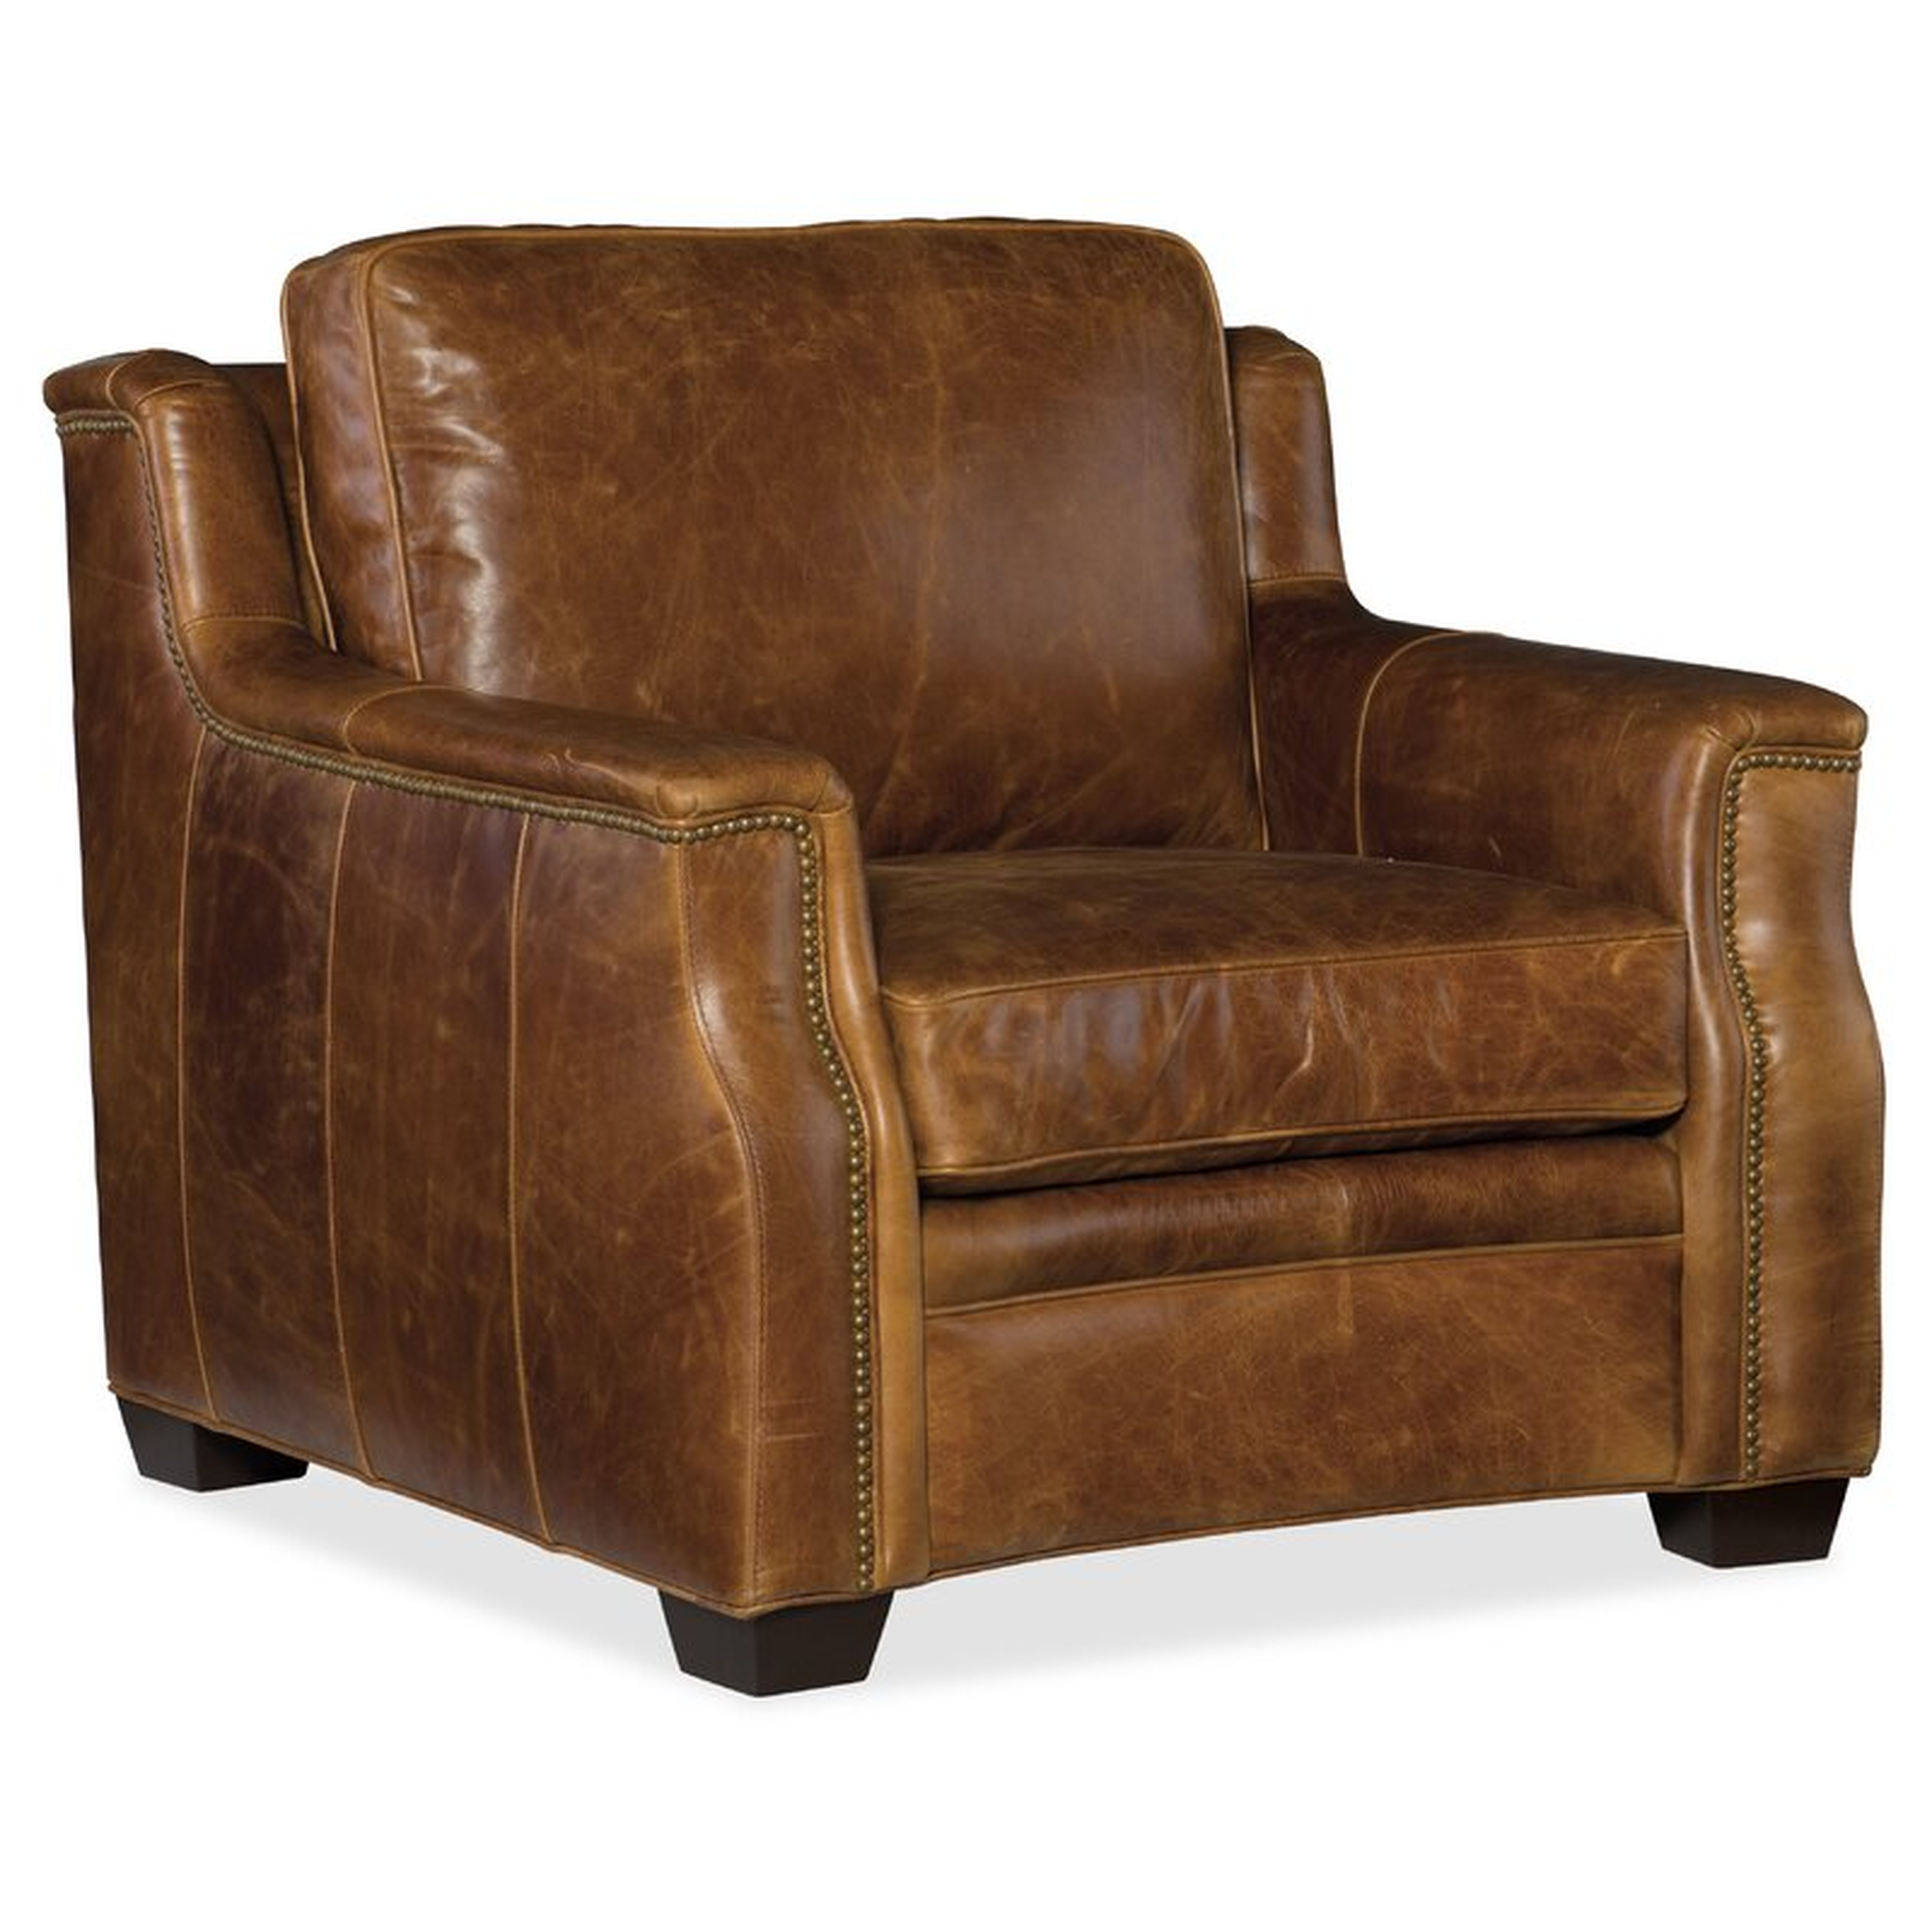 Hooker Furniture Yates 39.5"" Wide Genuine Leather Club Chair - Perigold